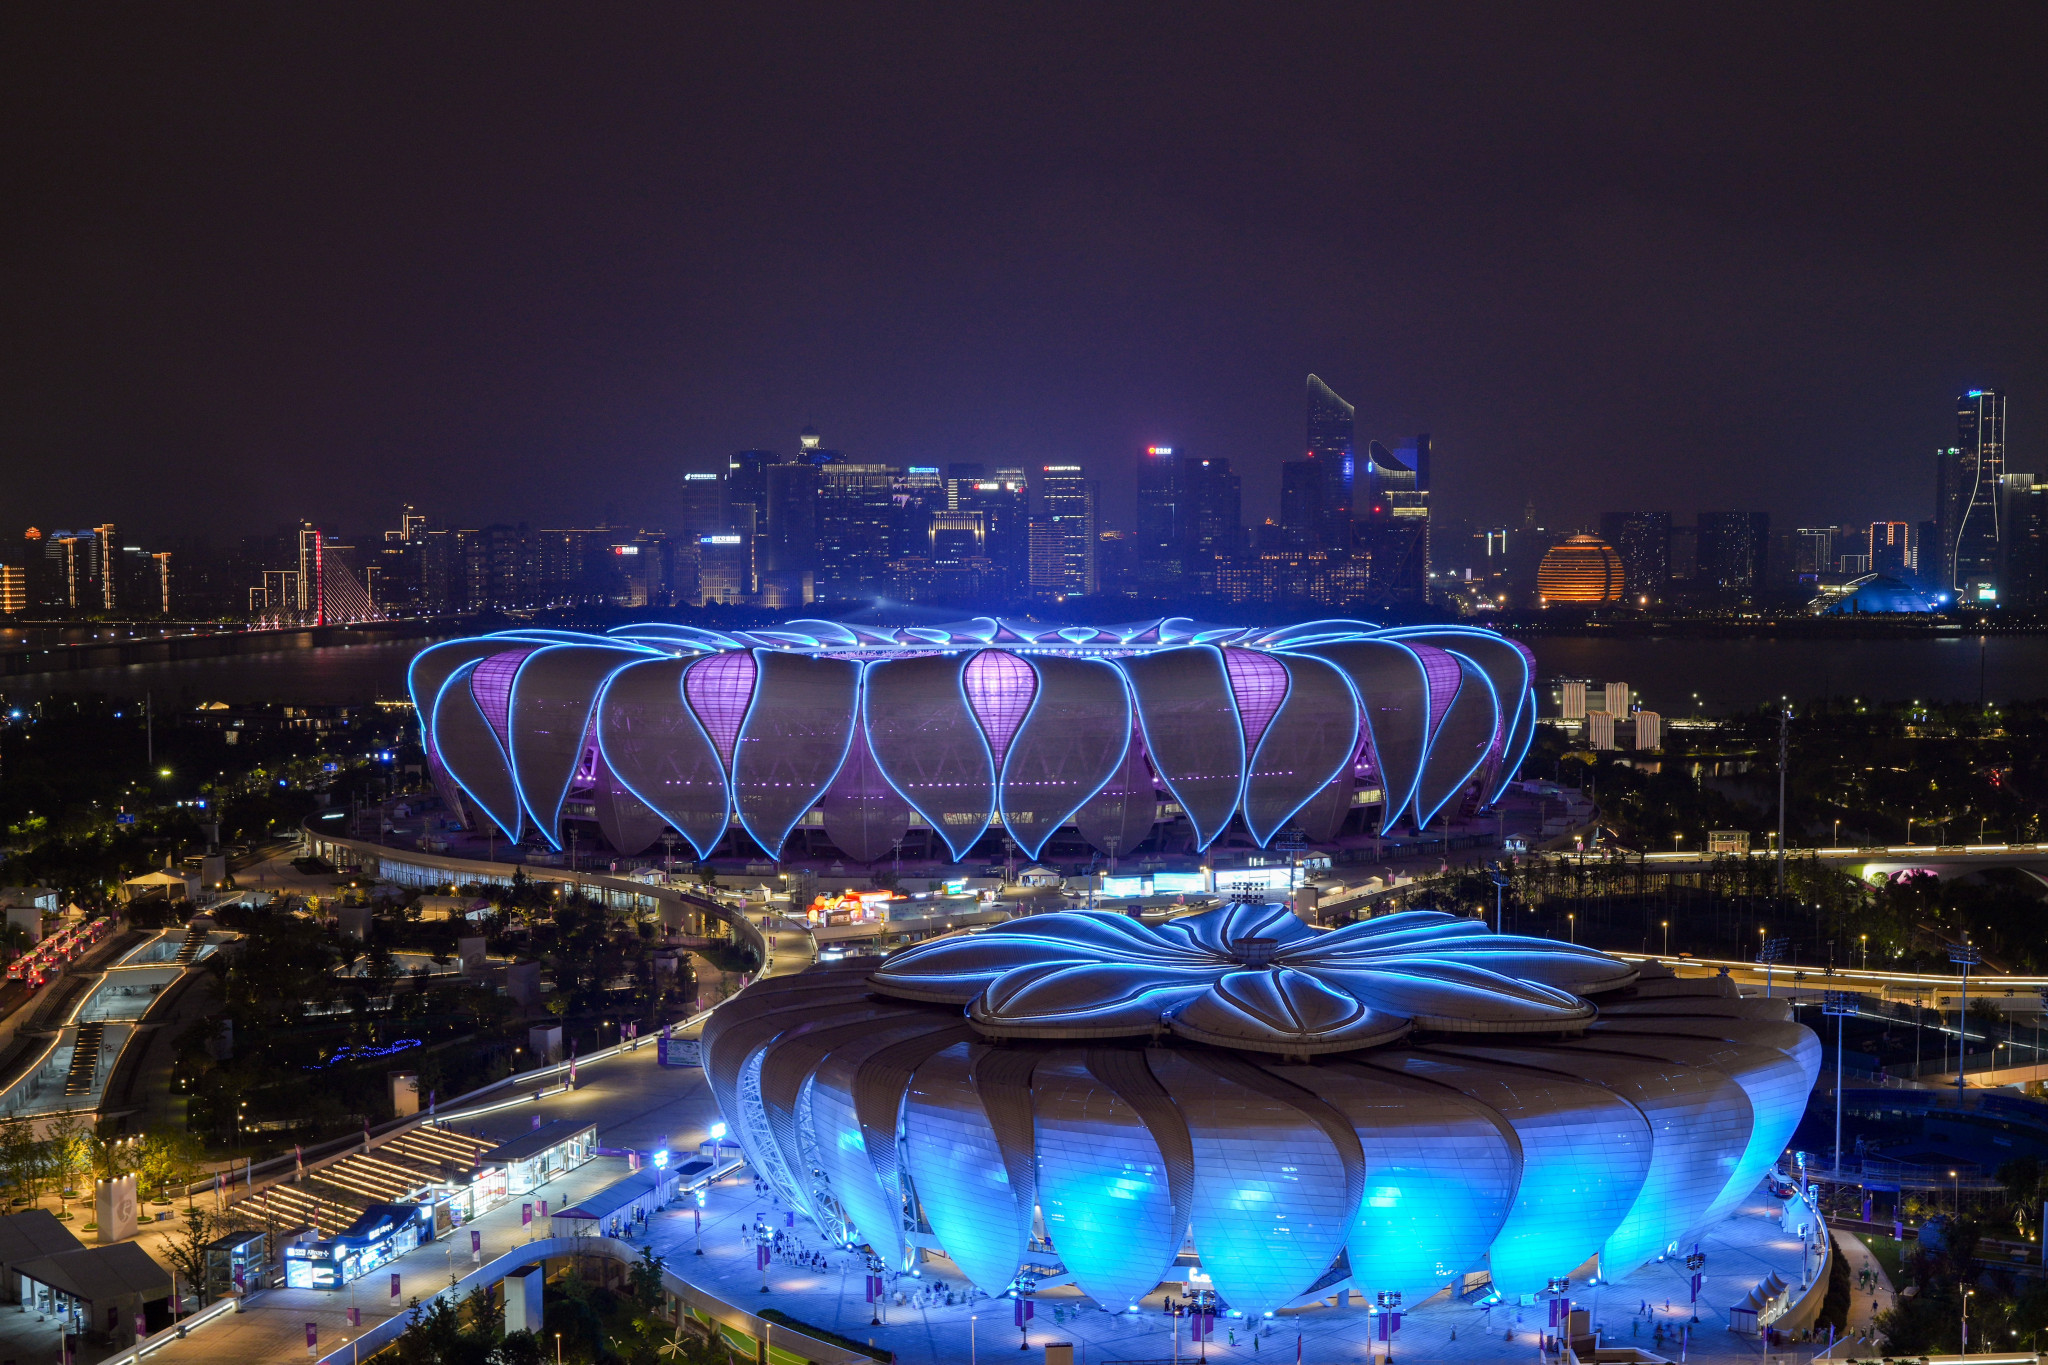 Hangzhou 2022 venues, including the Hangzhou Olympic Sports Centre Stadium, have been considered 